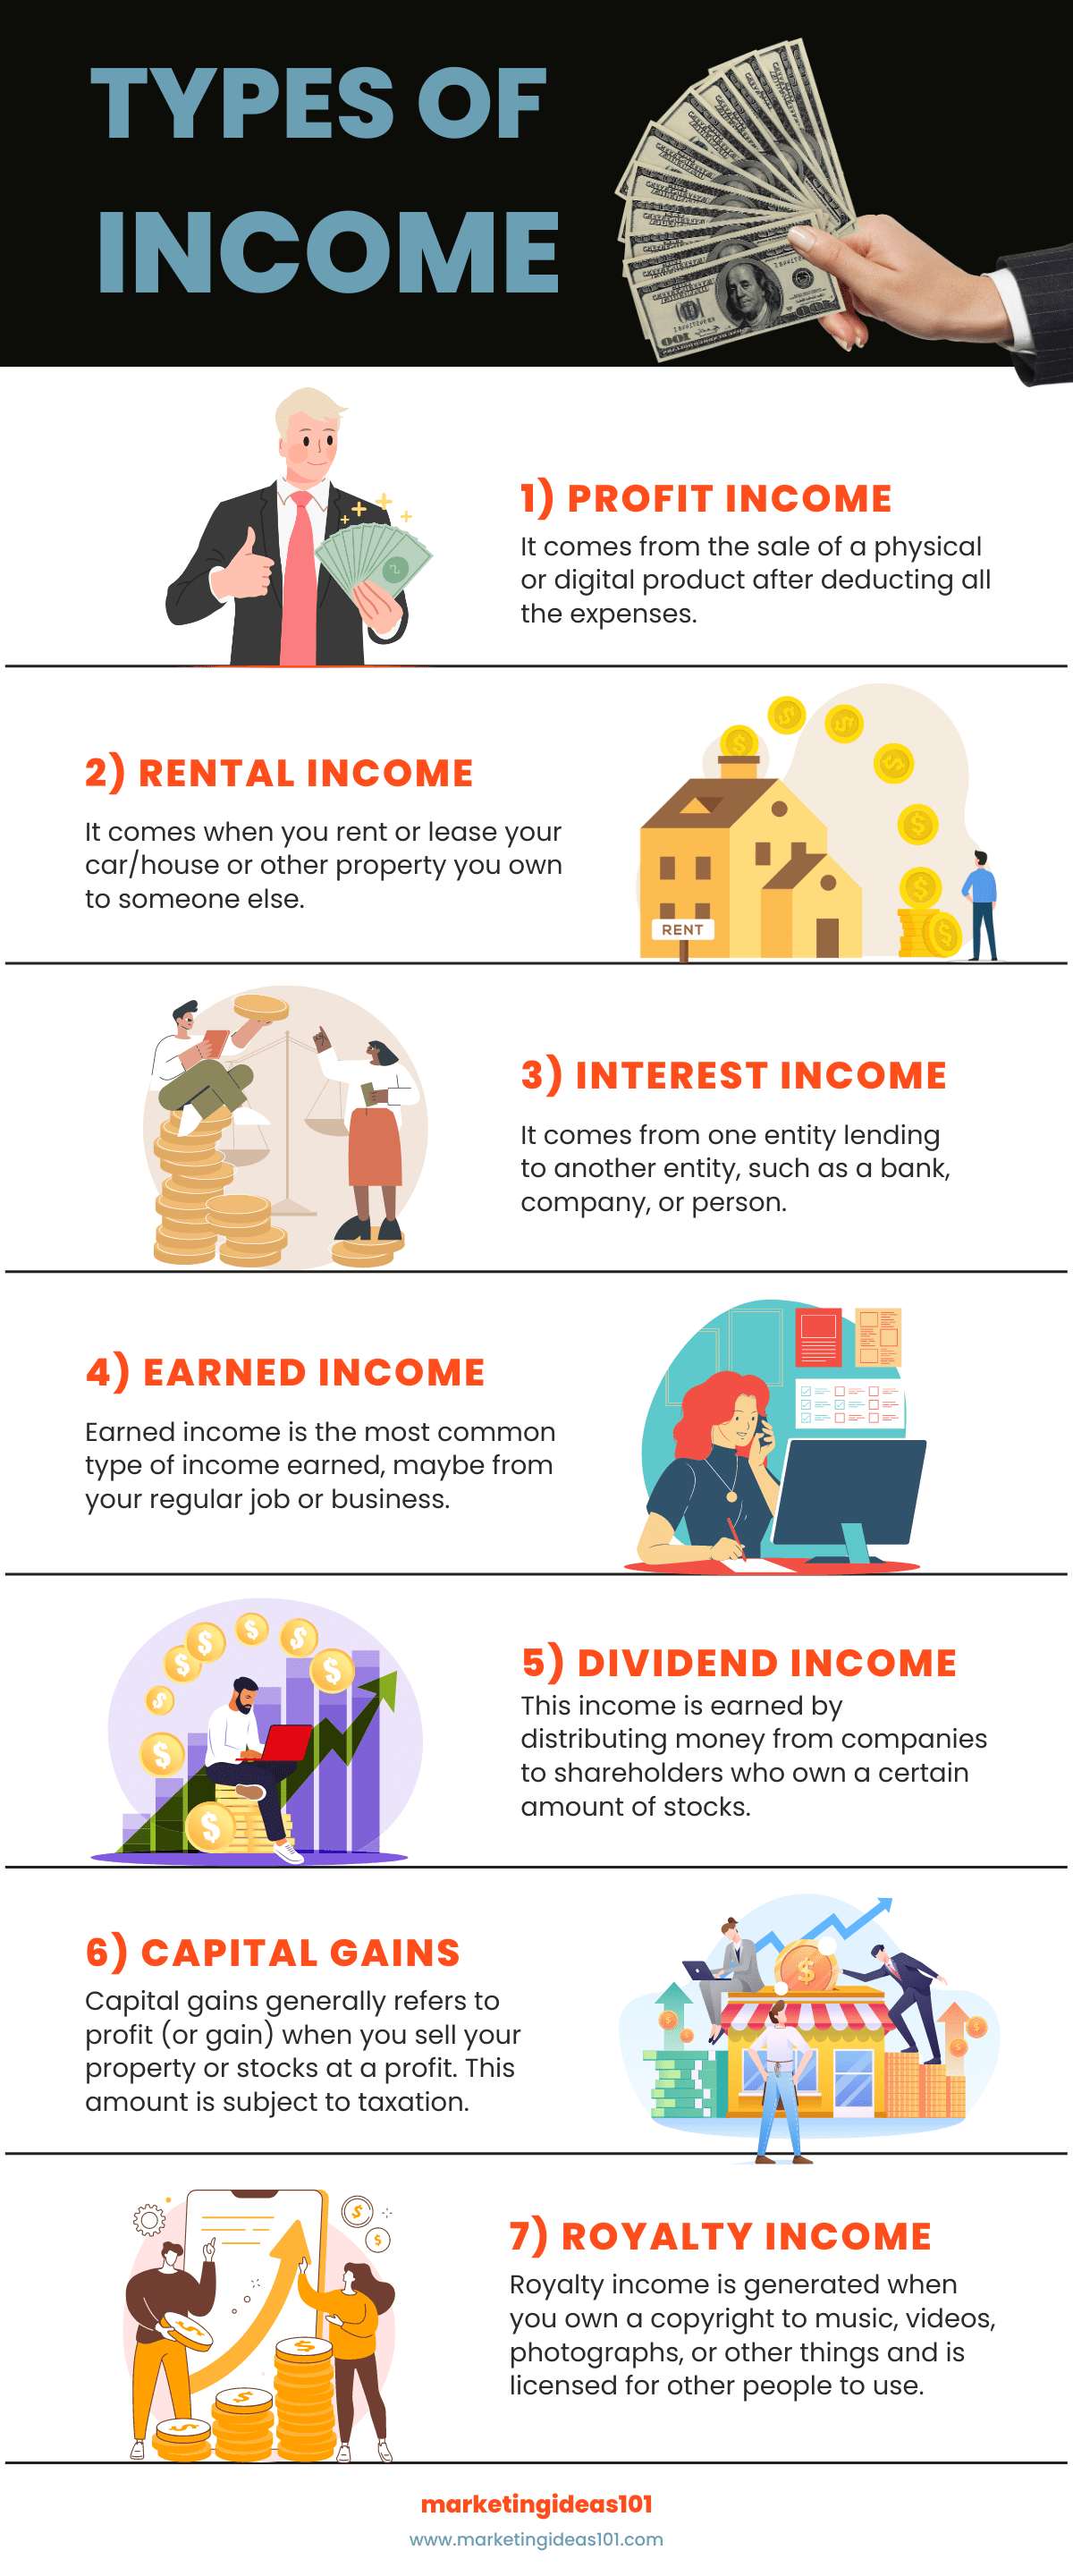 Types of Income